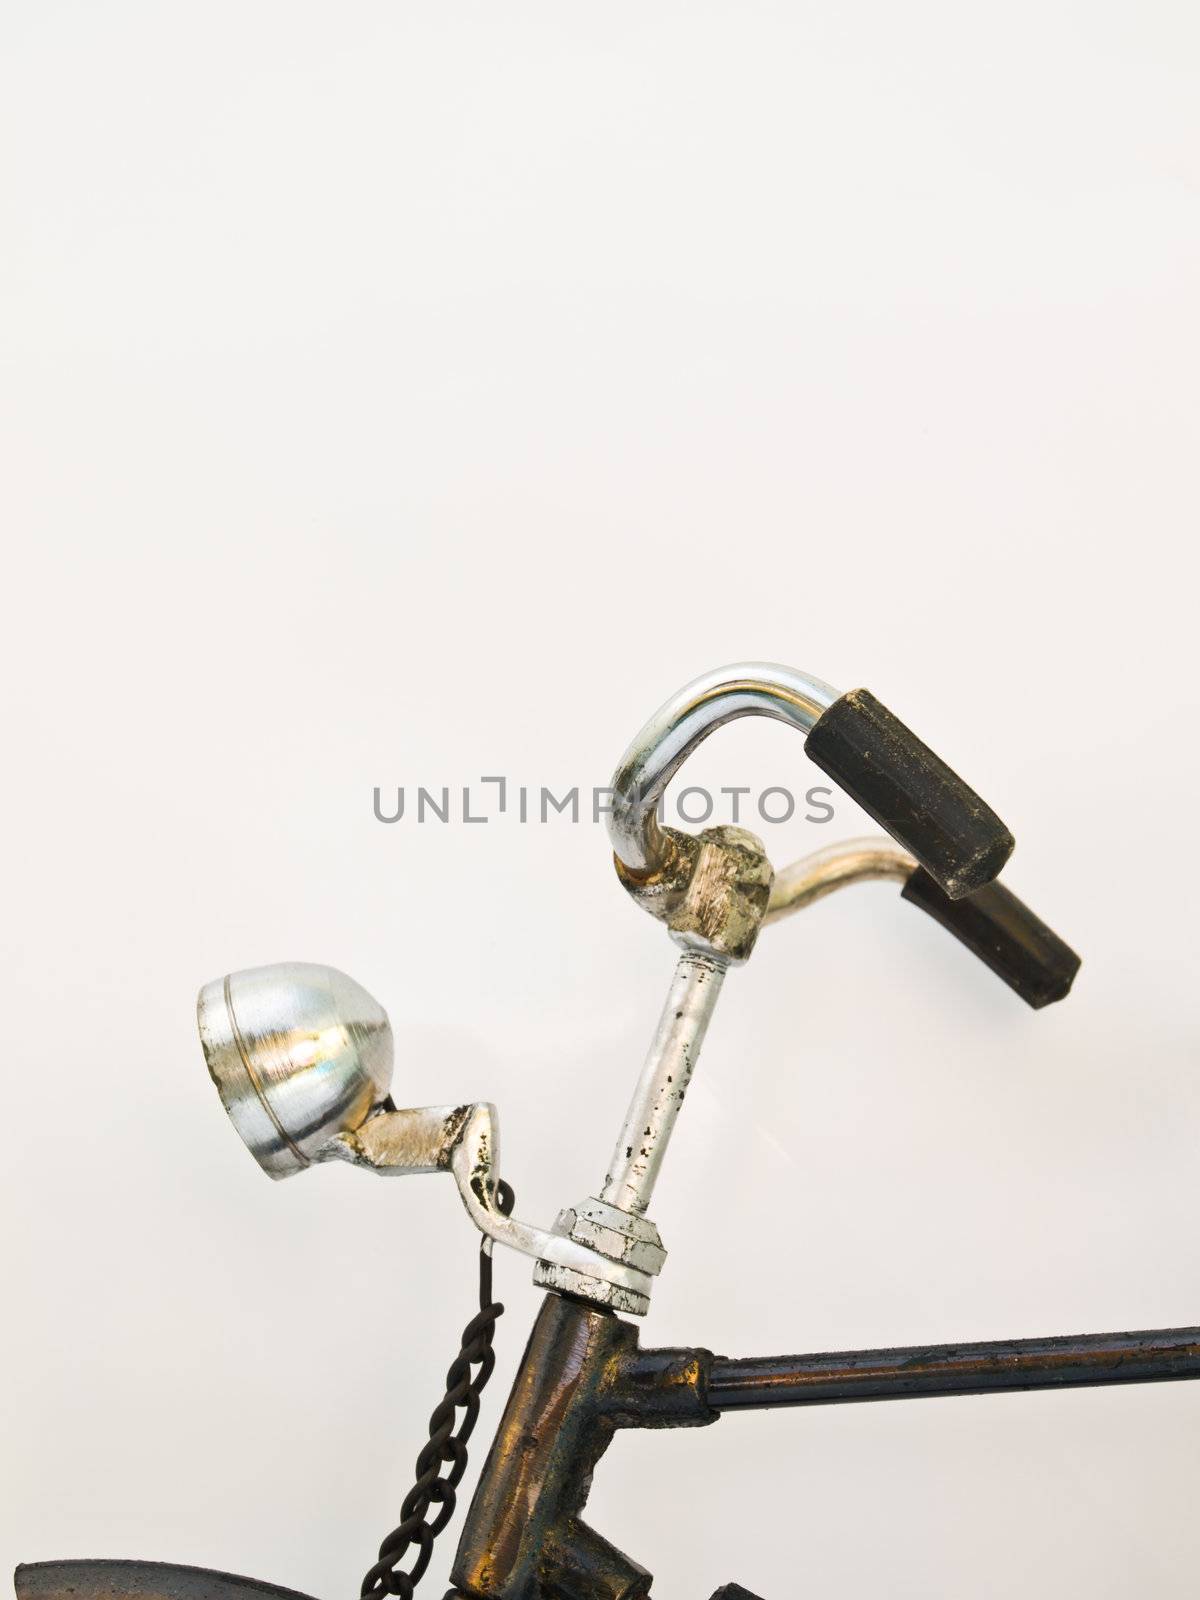 An Iron bicycle model isolated on white background by gururugu